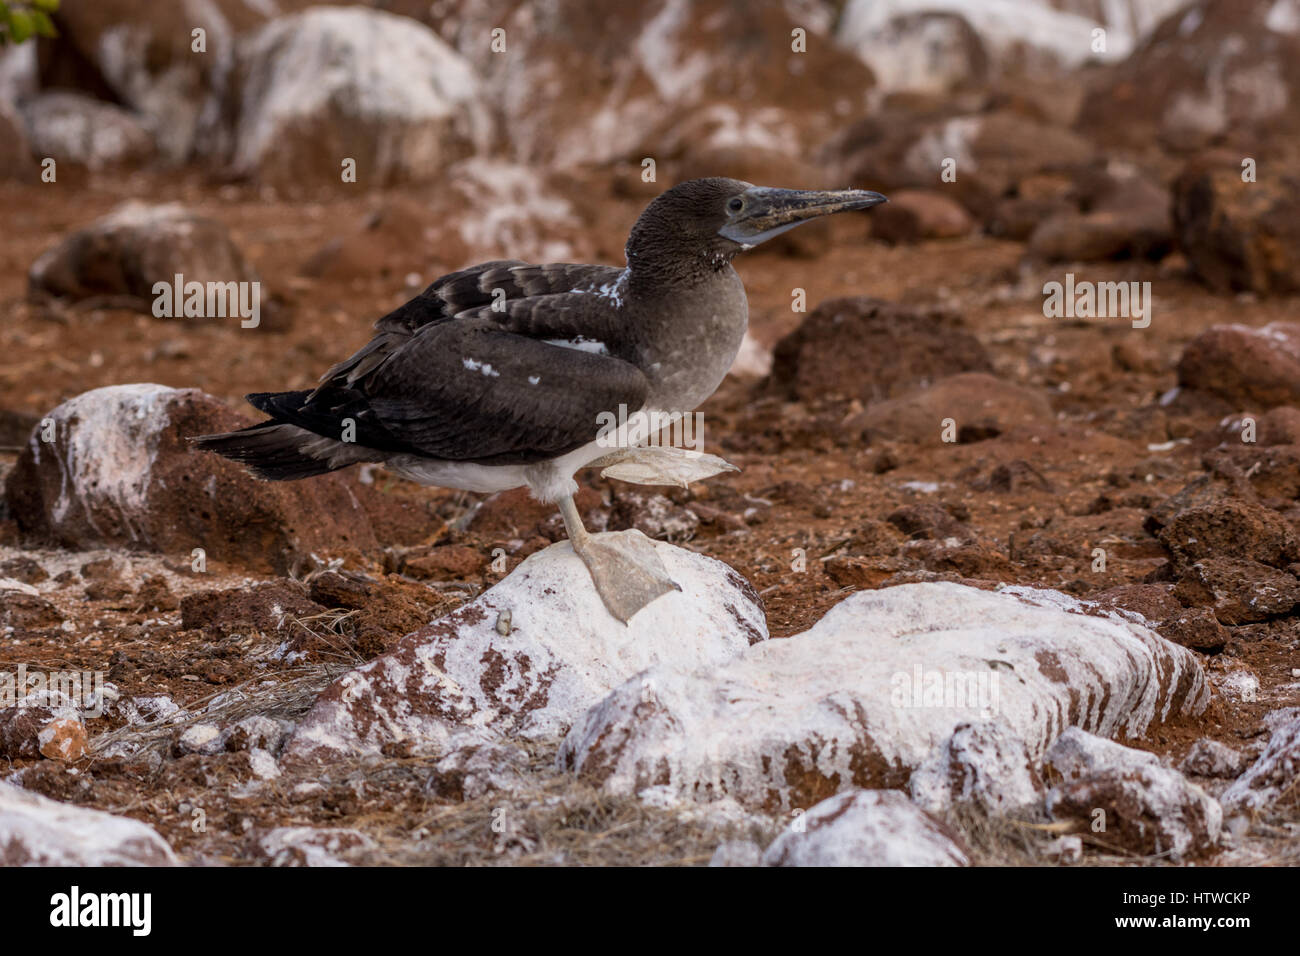 An immature Blue Booby (Sula nebouxii) standing on a rock with one foot raised on the Galapagos Islands. Stock Photo